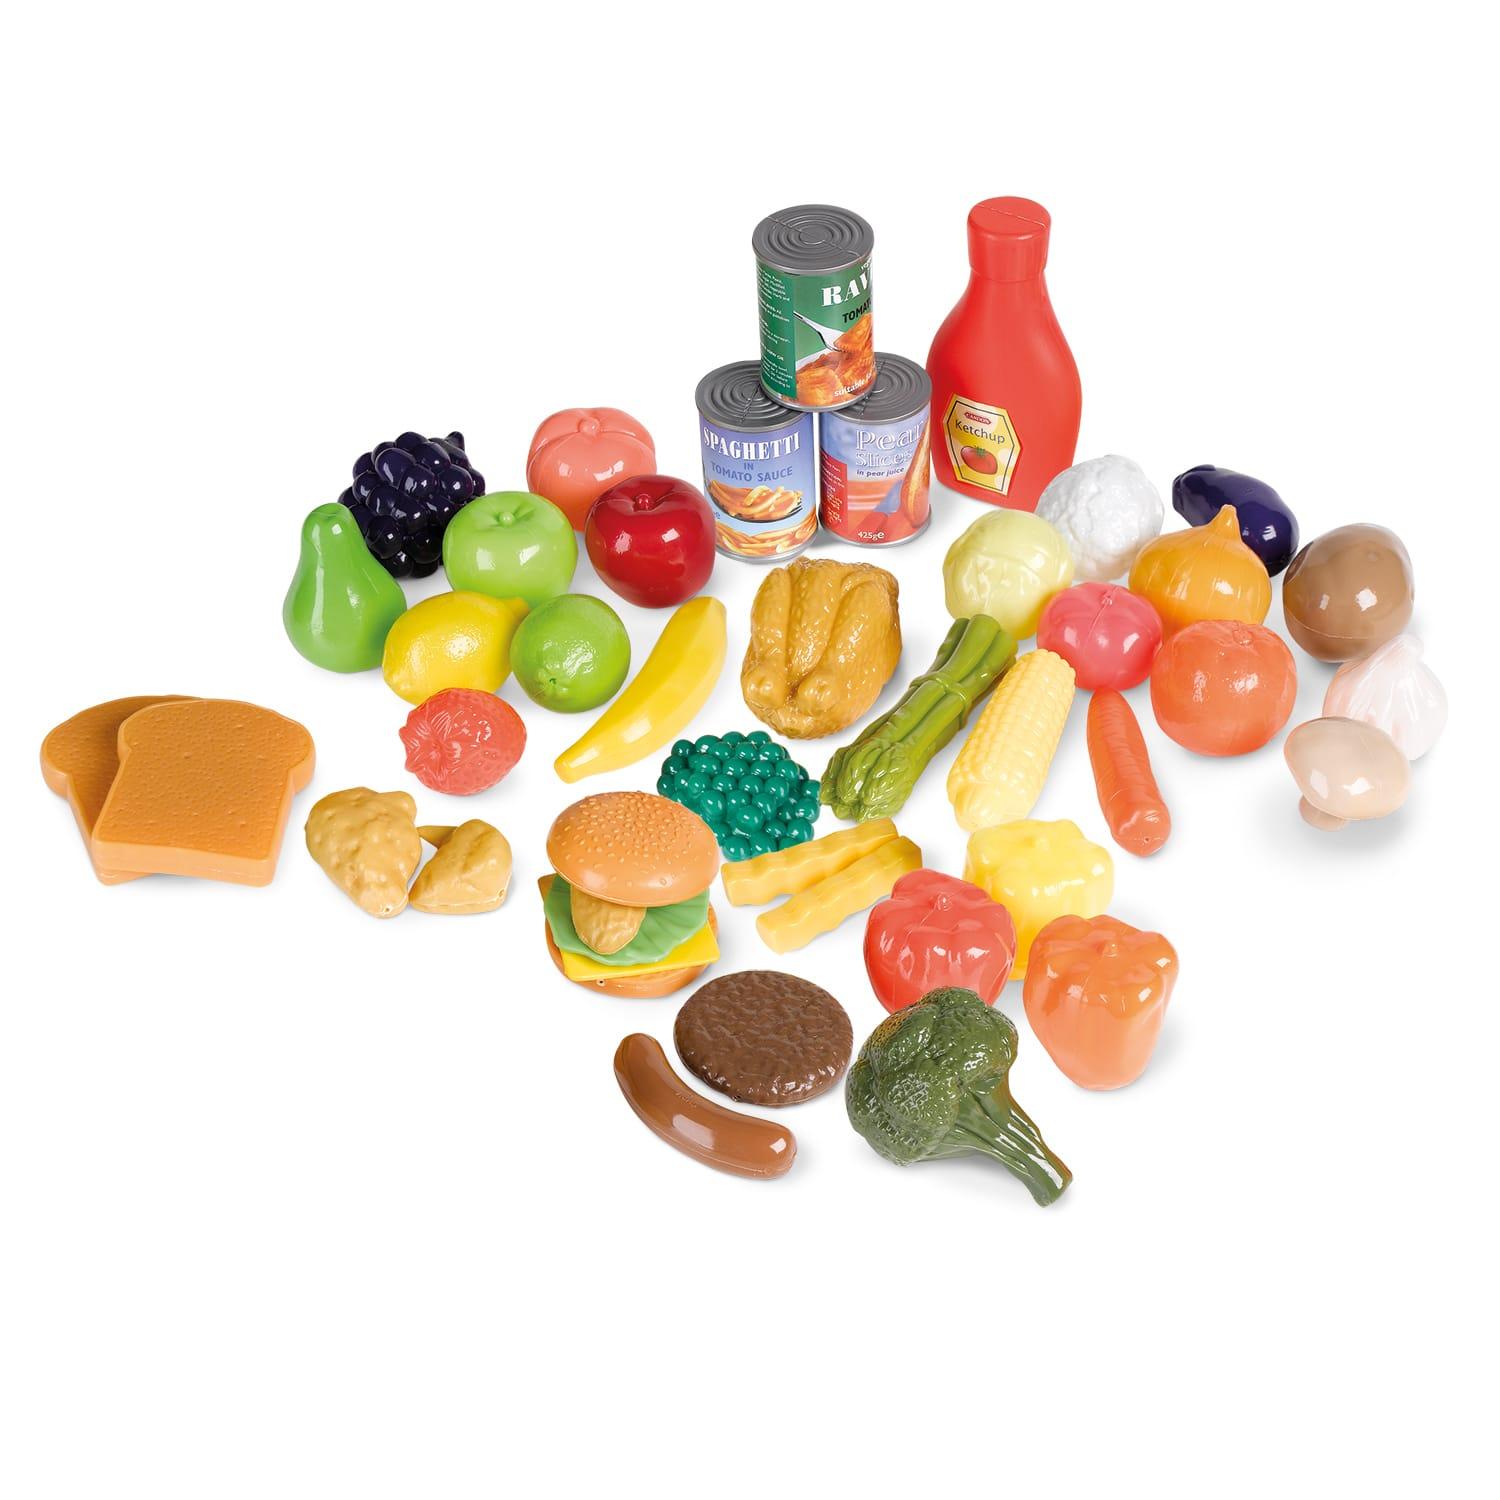 Casdon Play Food Set Little Cook Plastic Pretend Food Role Play Toy/Gift  BNIB 